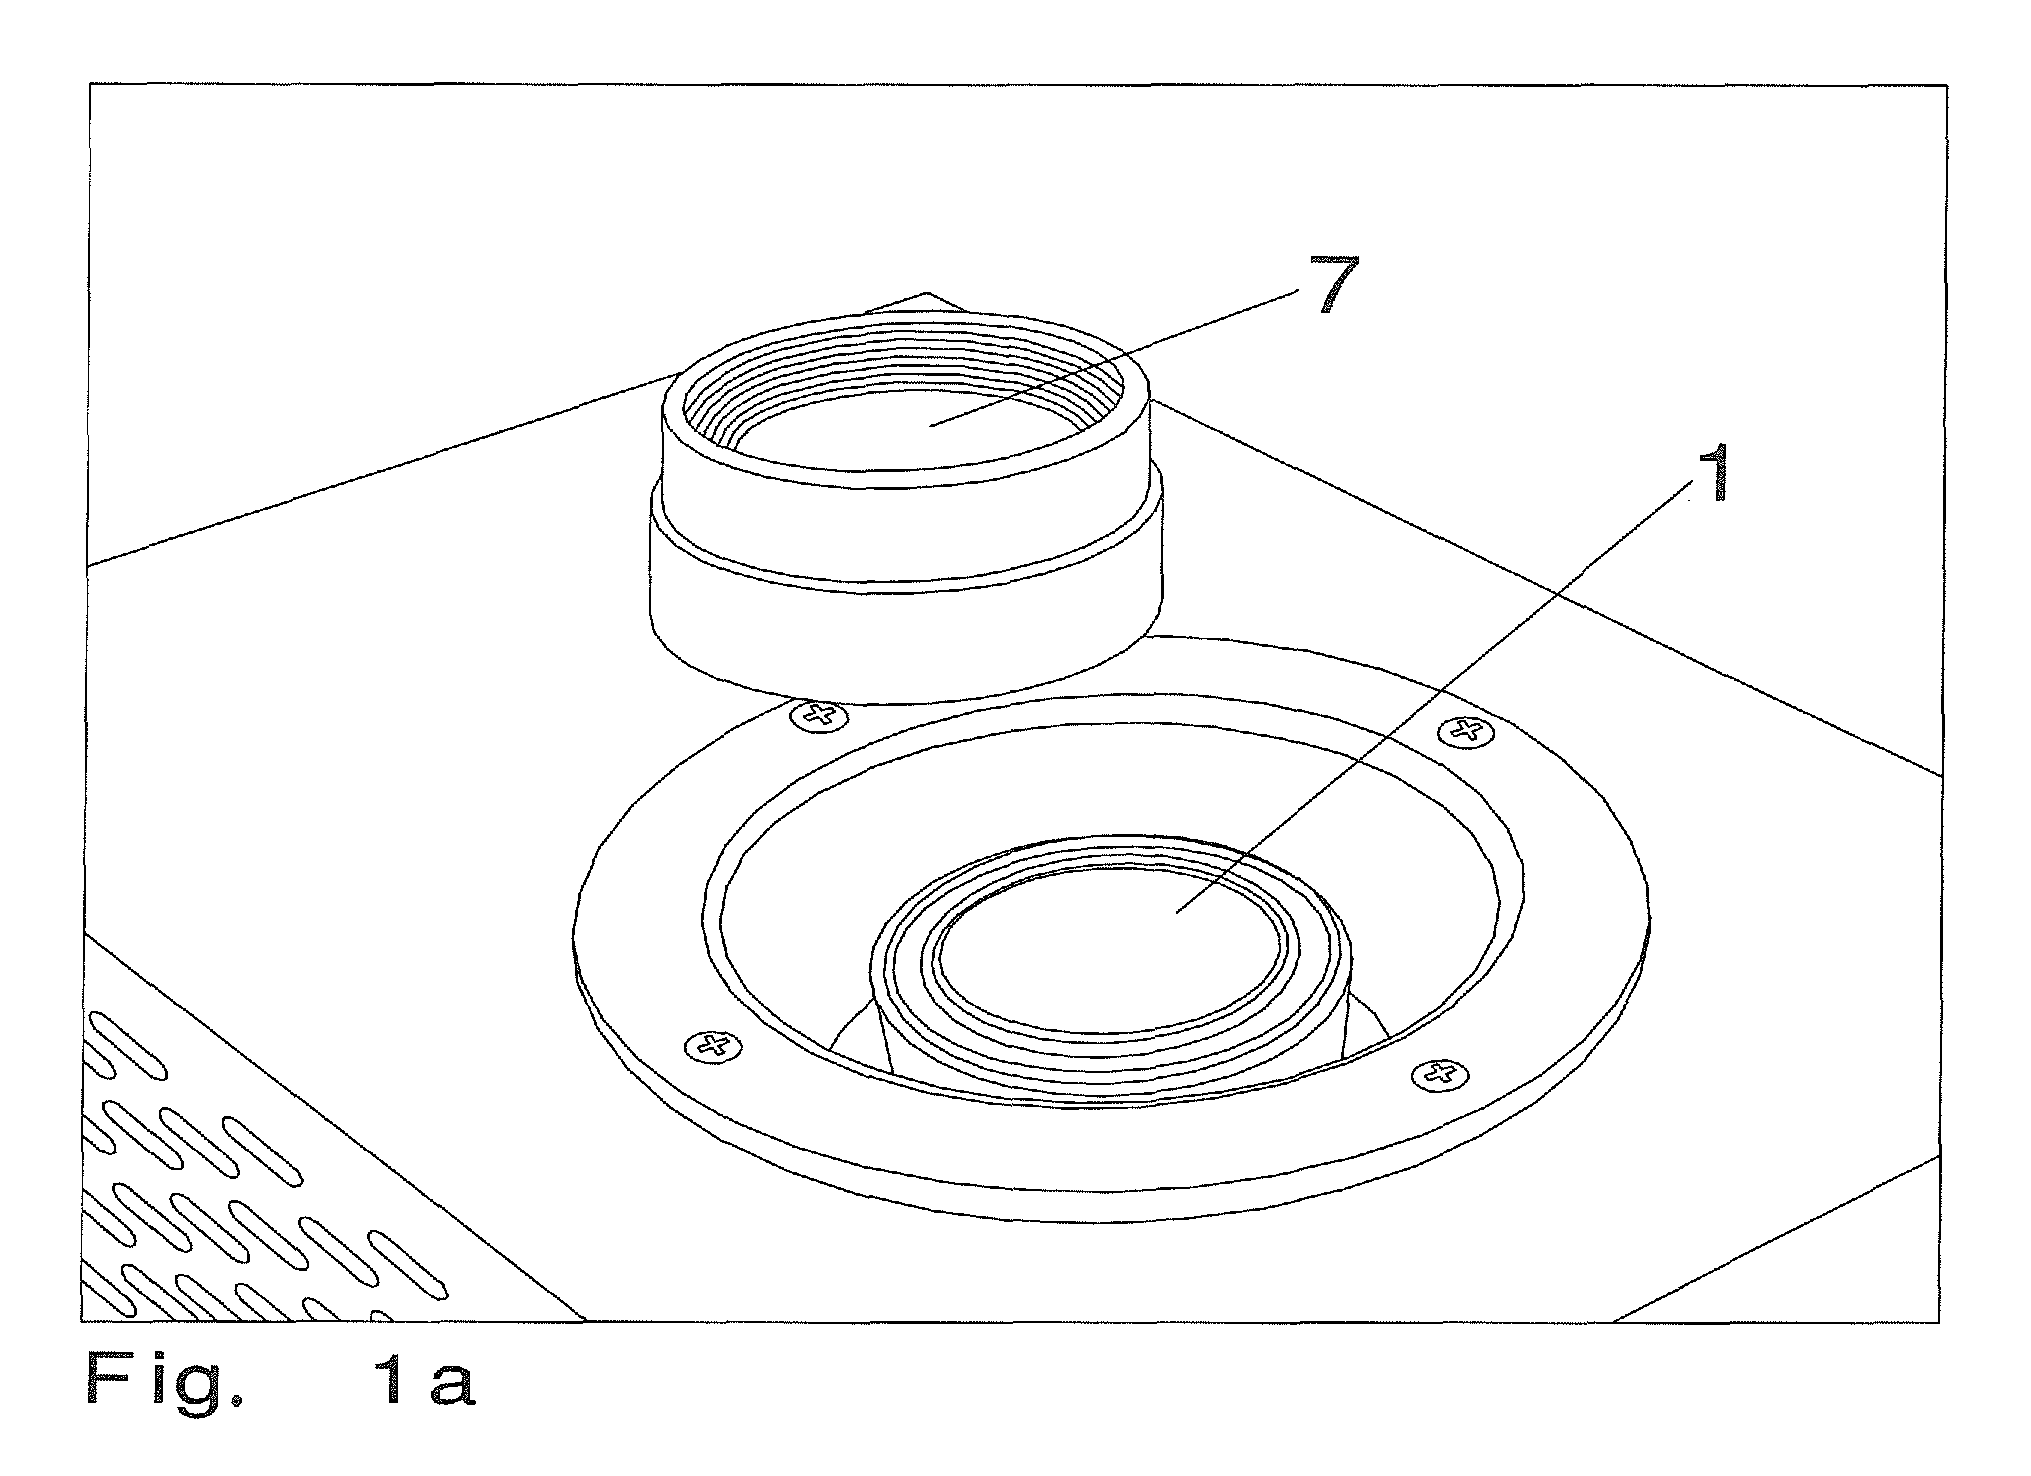 Method and device for an accelerated oxidation test of fuels or petroleum products, as well as a computer program for controlling such a device, and a corresponding computer readable storage medium